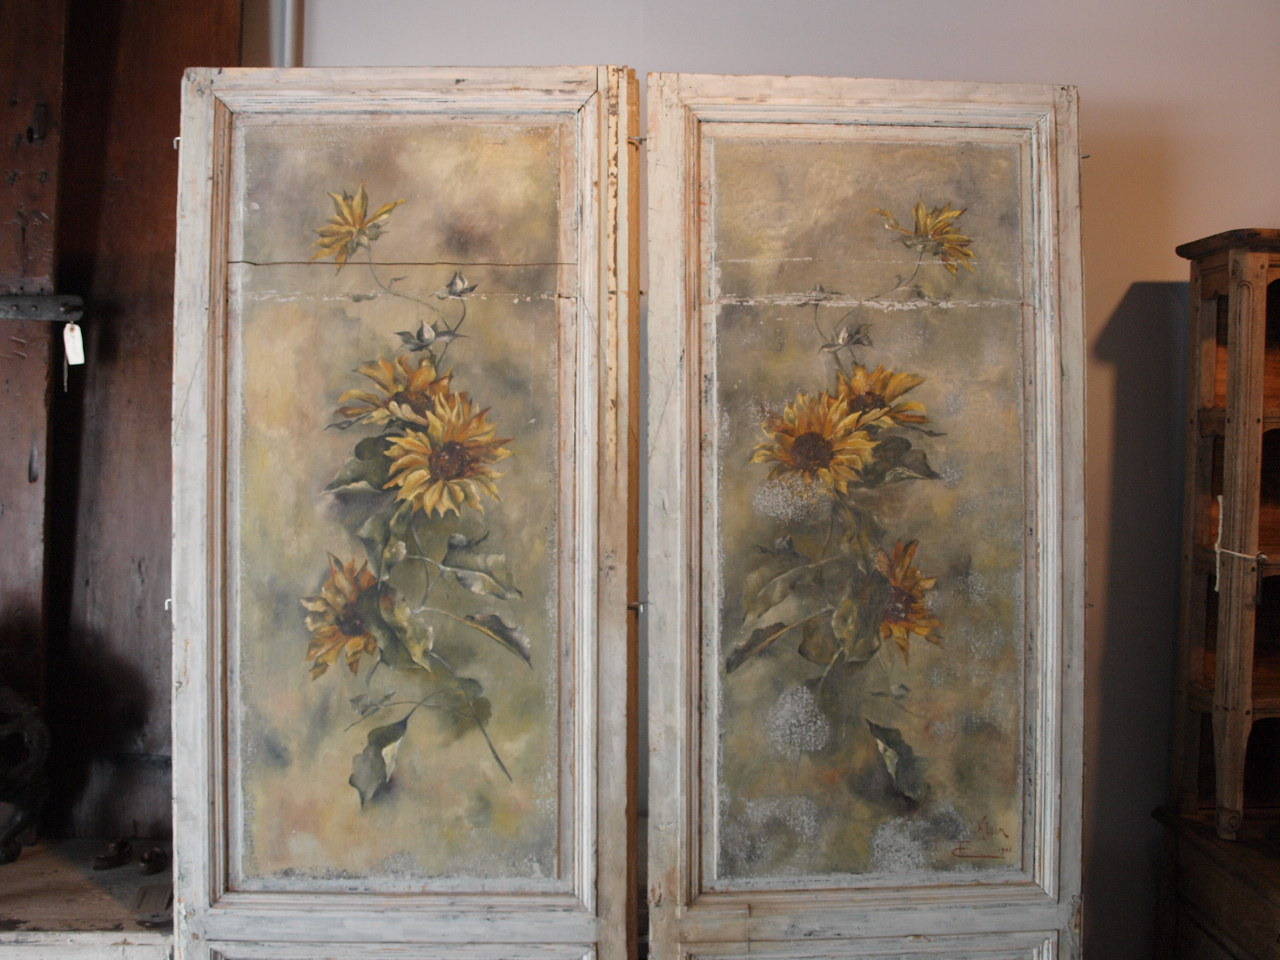 A beautiful pair of French painted door panels.  The artwork is of sunflowers and is signed by C. Klein and dated 1903.  Wonderful as art work or incorporated as pantry doors or other architectural elements.